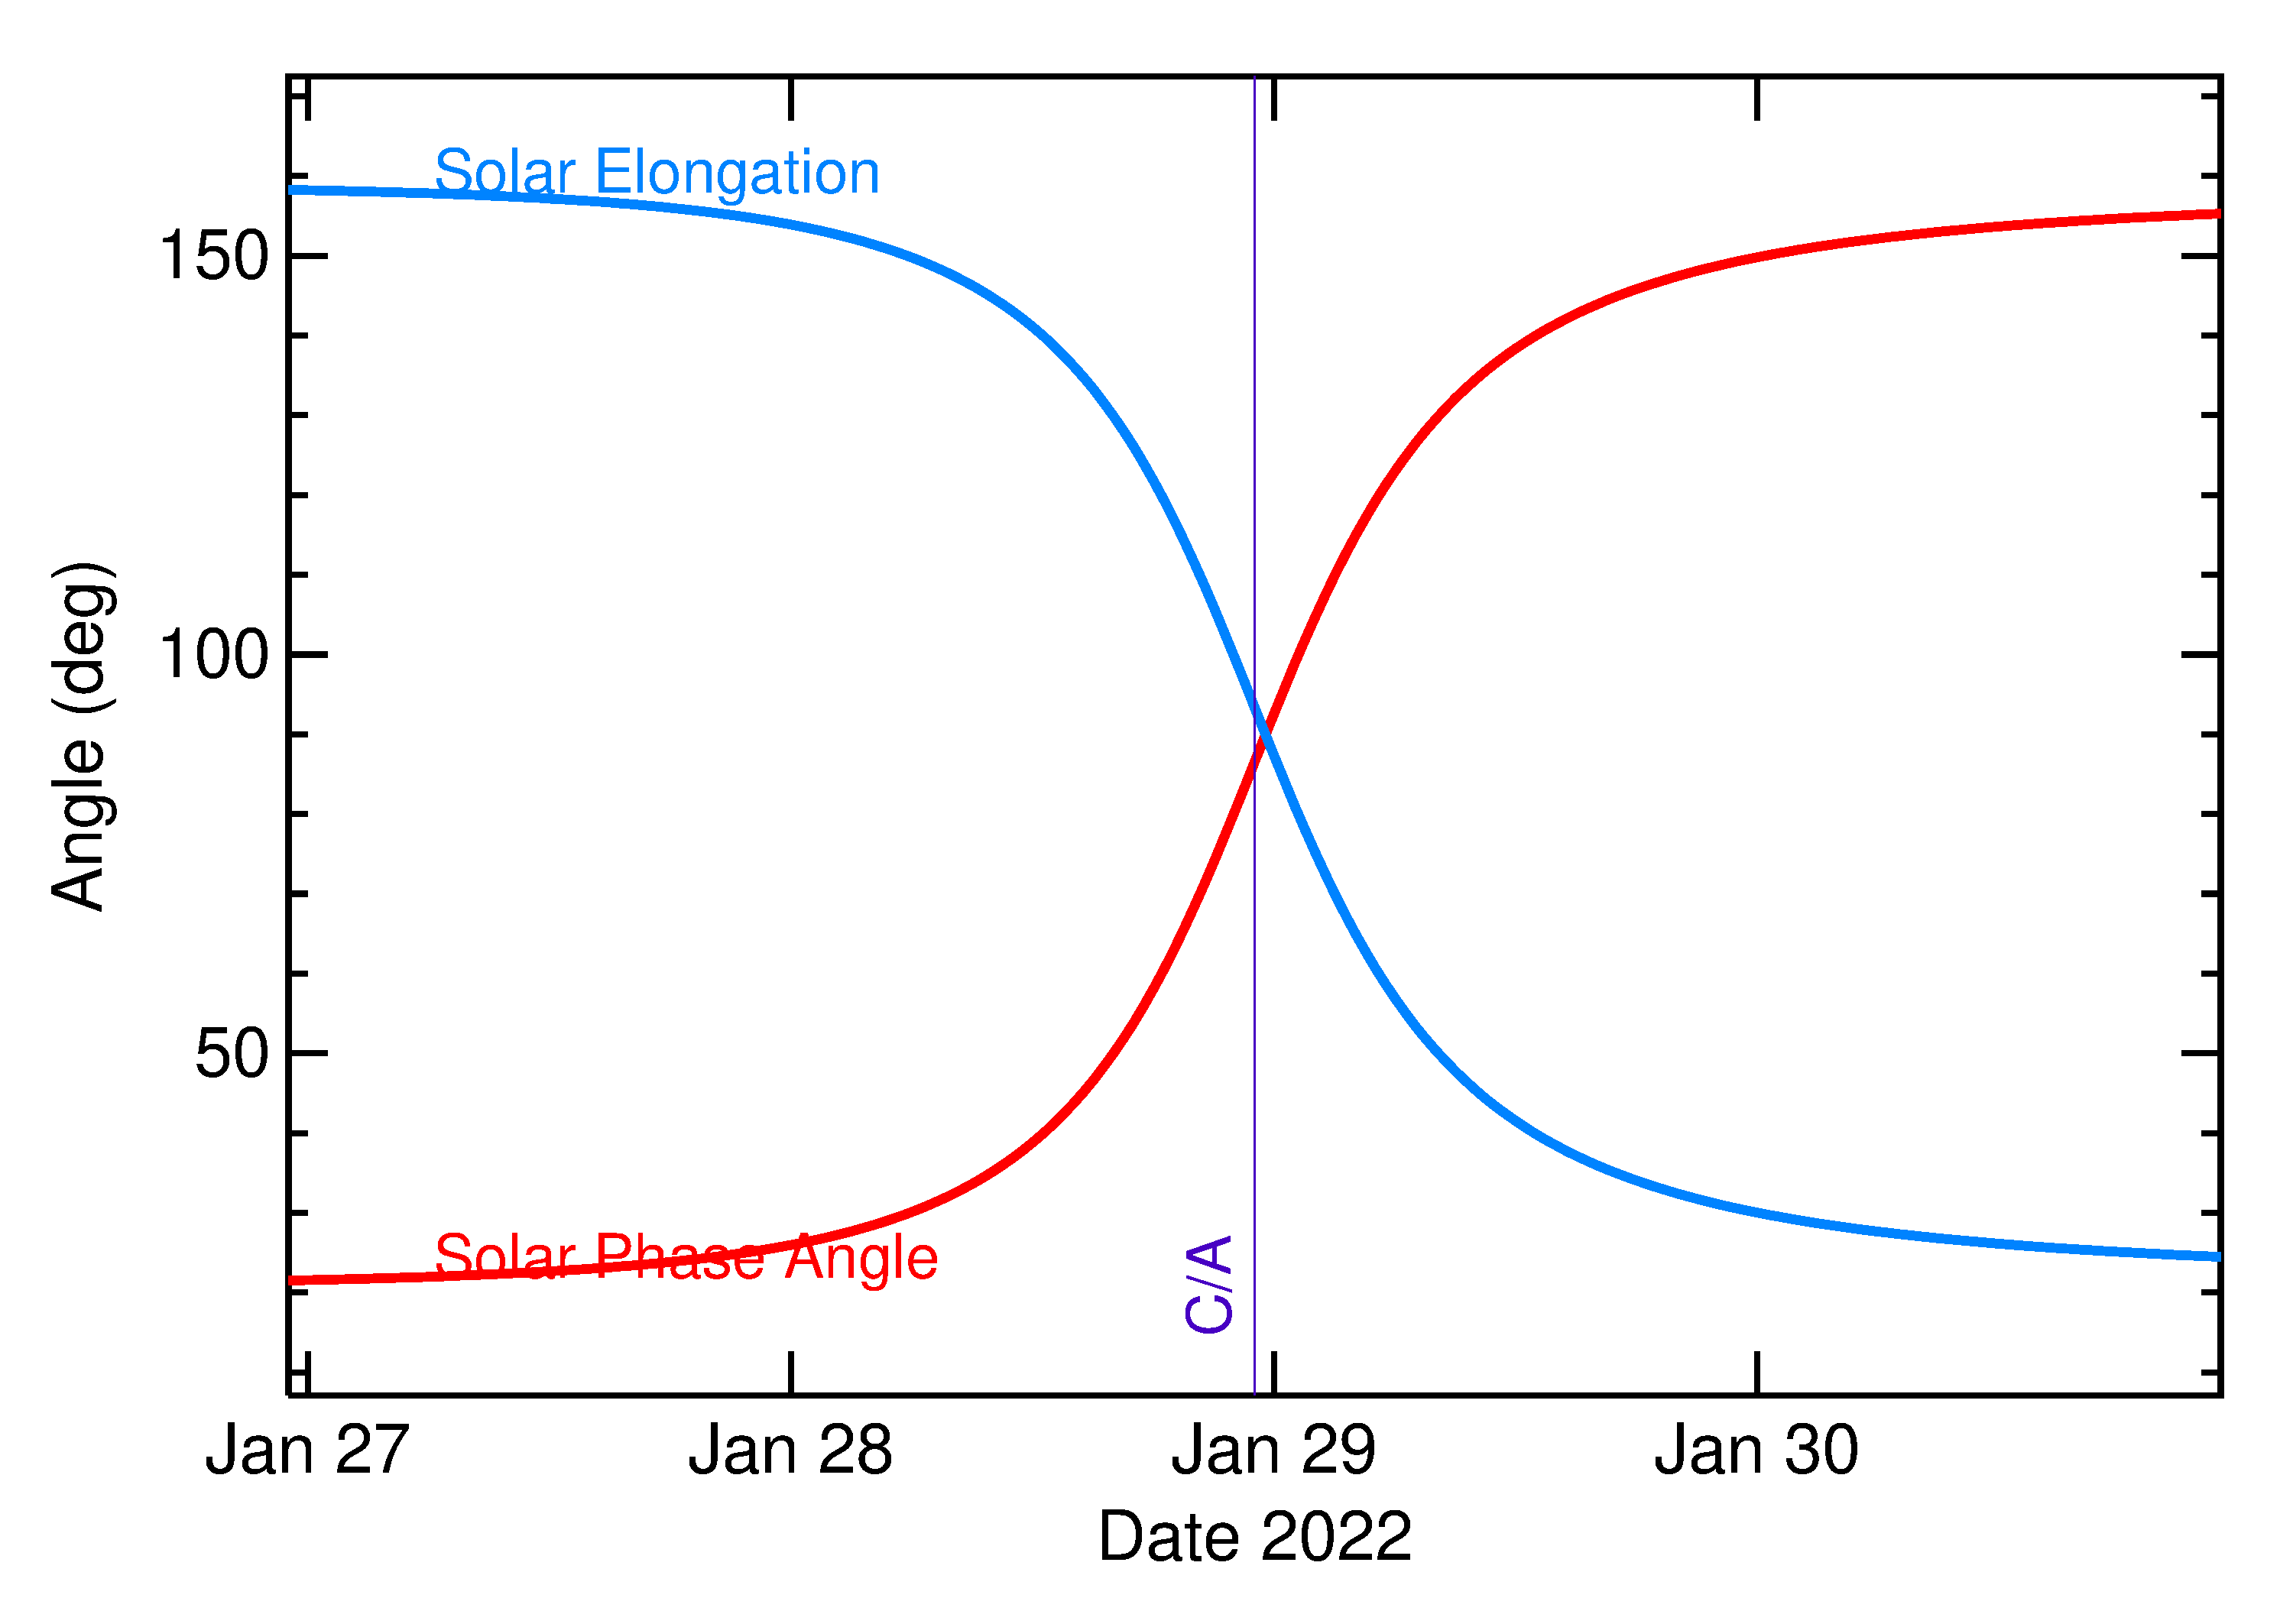 Solar Elongation and Solar Phase Angle of 2022 BN2 in the days around closest approach